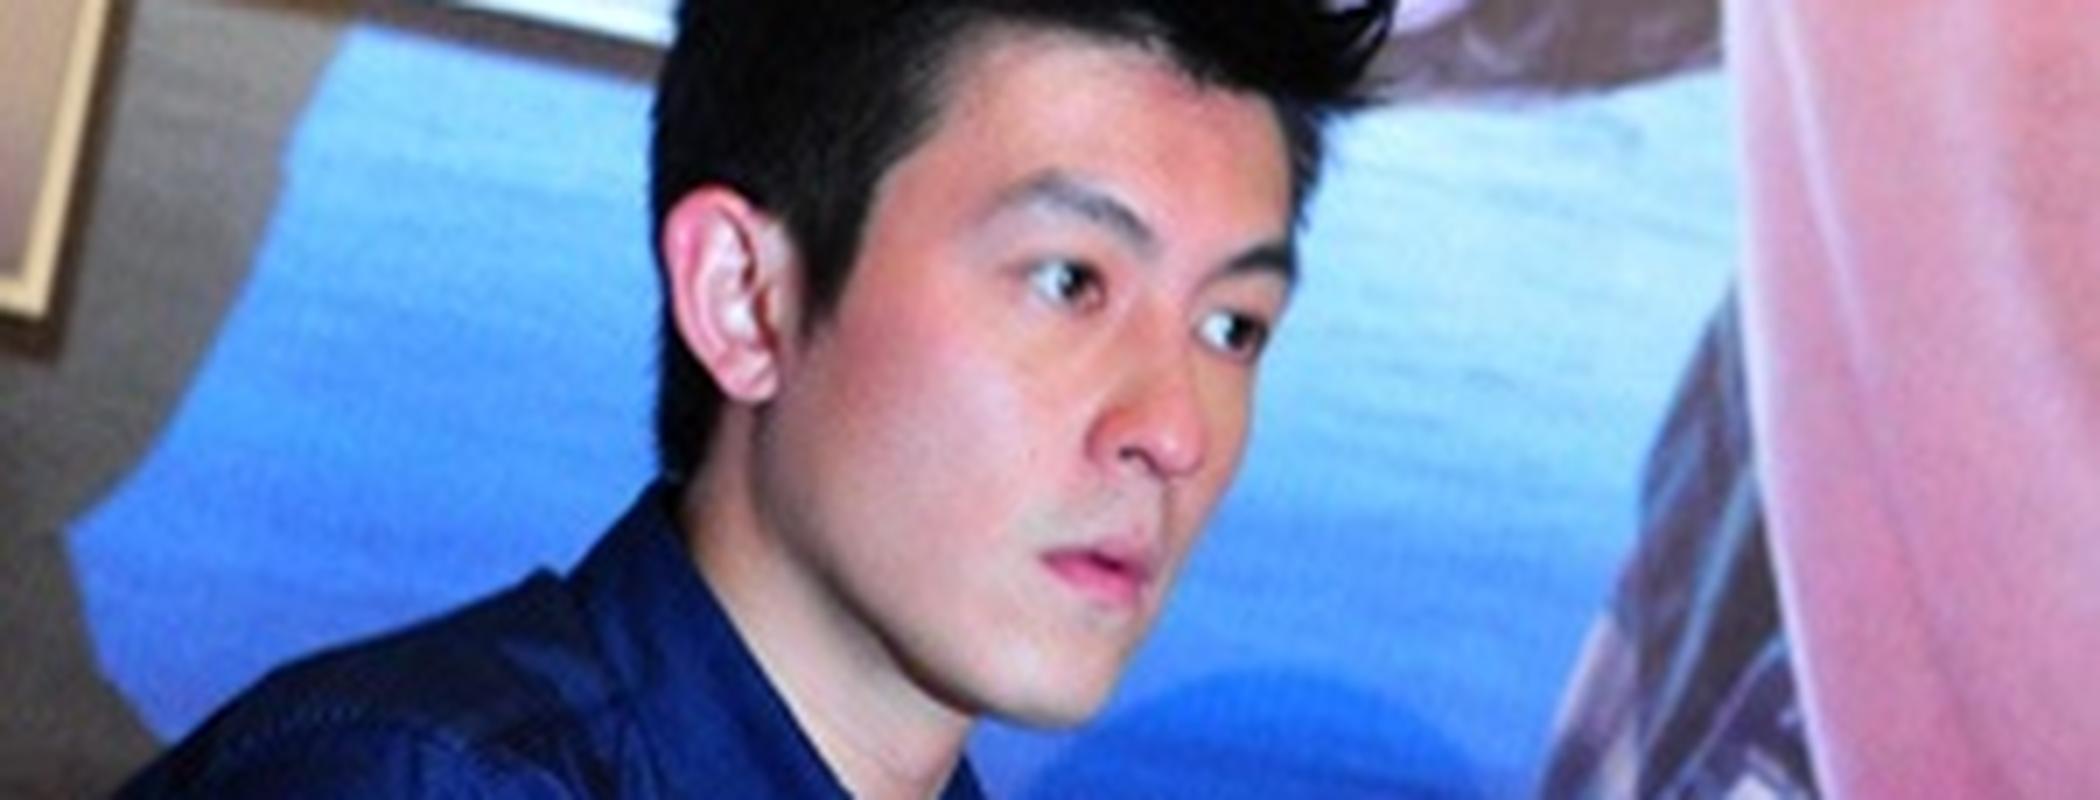 Edison Chen in 1st Movie Since Sex Photo Scandal Adult Picture